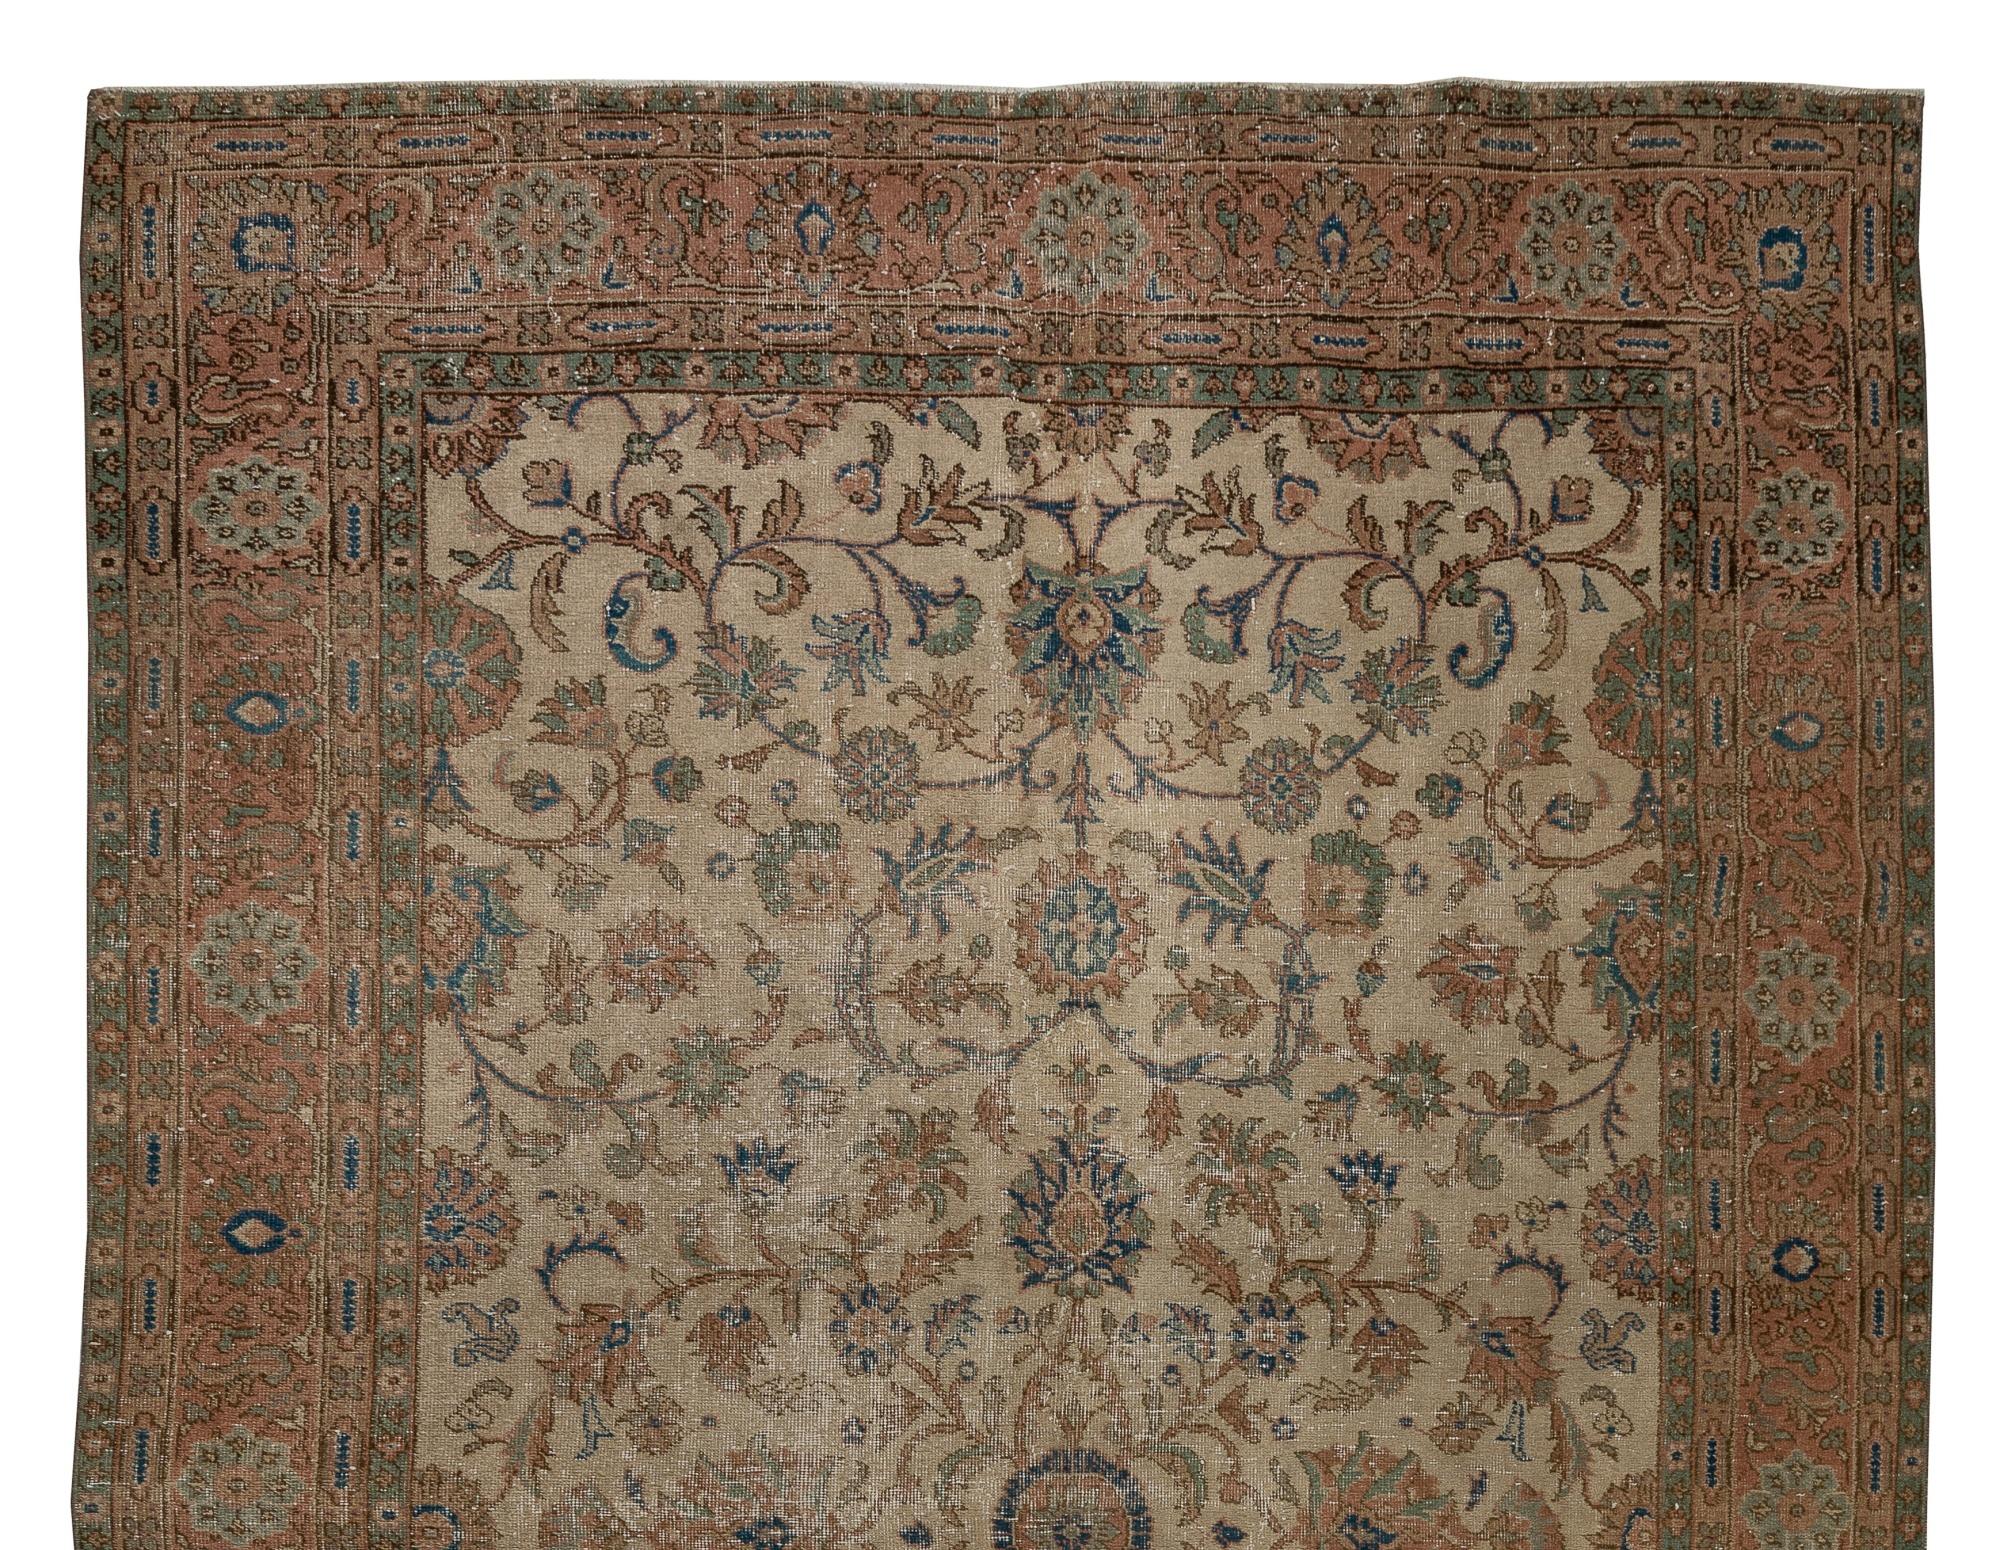 A vintage hand-knotted Oushak area rug from Central Turkey featuring an all-over design of lush scrolling vines decorated with finely detailed leaves, palmettes and rosettes in cerulean green, navy blue and dark coral pink against a stone beige